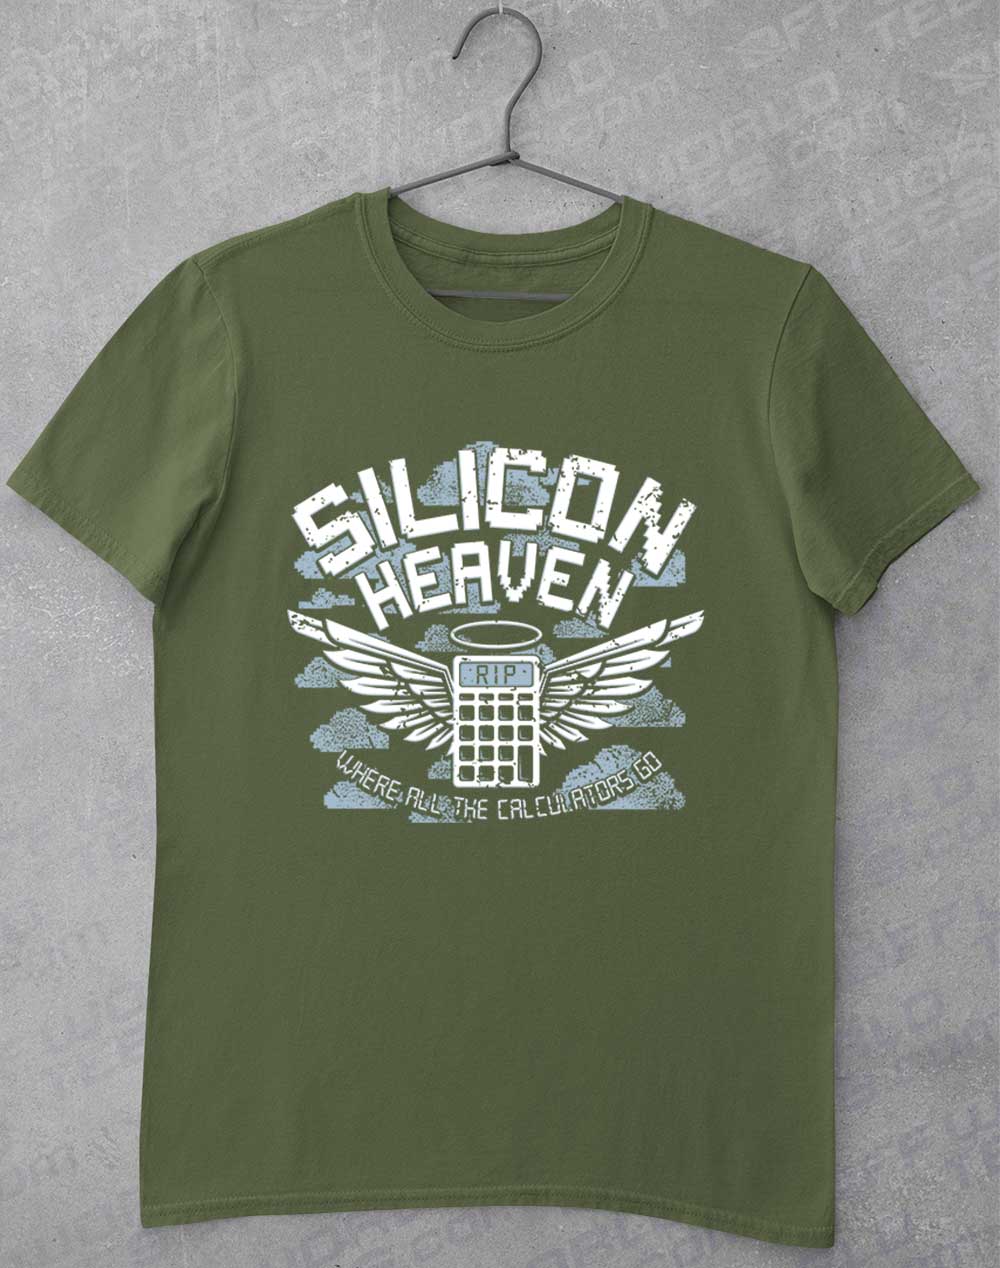 Military Green - Silicon Heaven T-Shirt